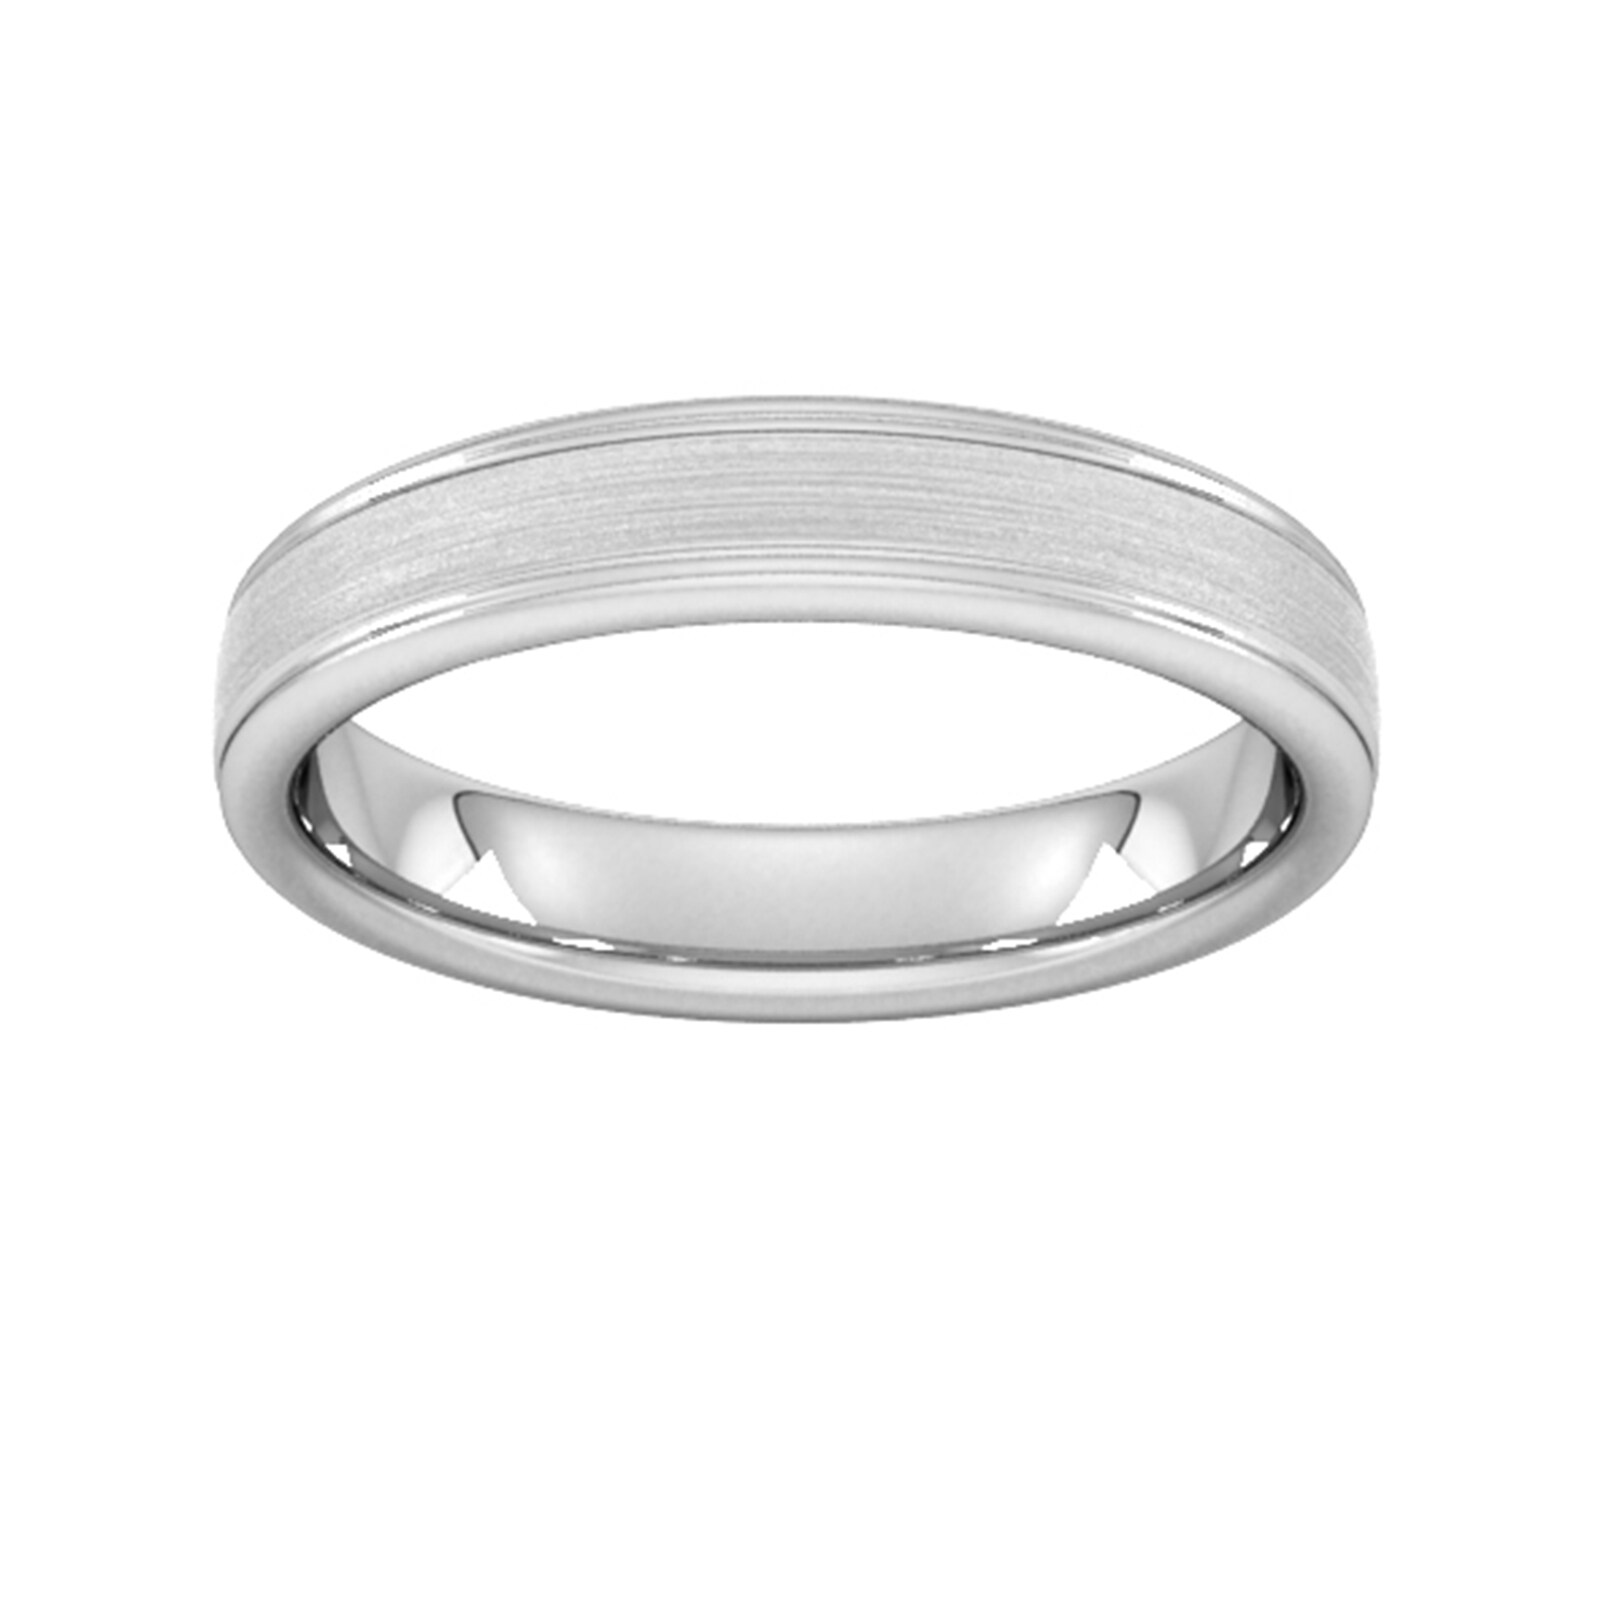 4mm Flat Court Heavy Matt Centre With Grooves Wedding Ring In 18 Carat White Gold - Ring Size V